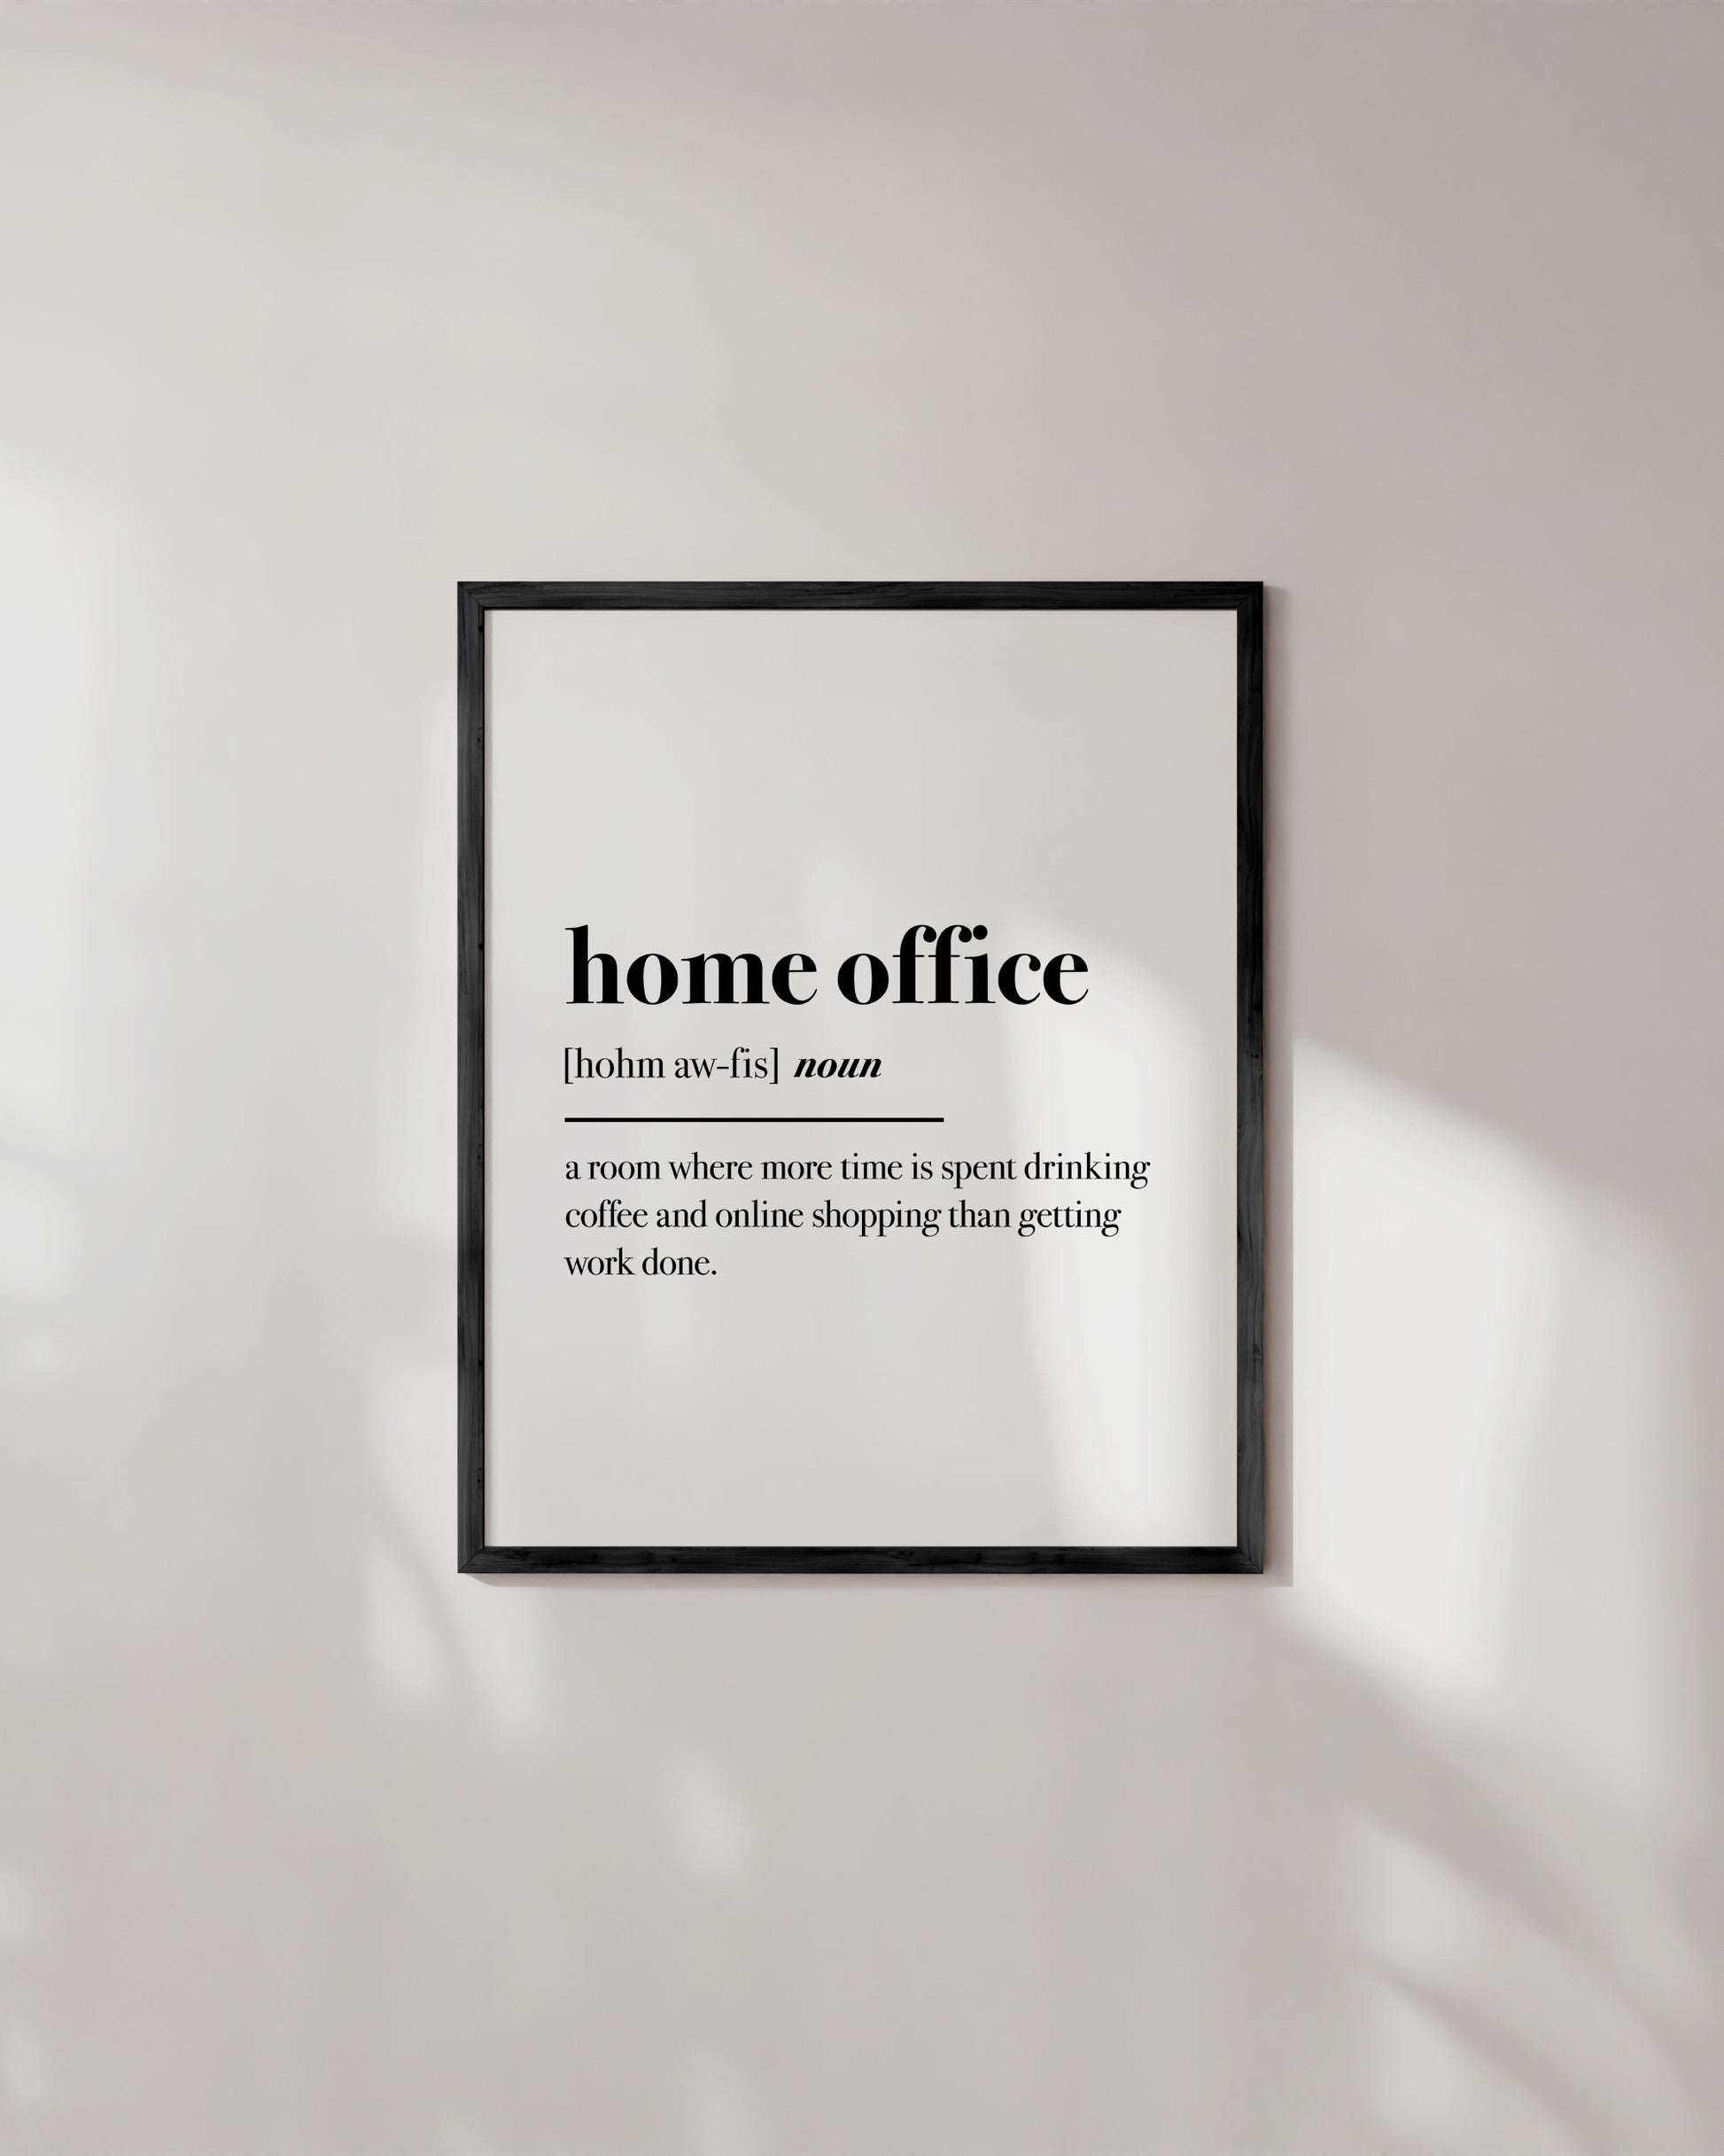 Haus and Hues Home Office Wall Decor - Funny Wall Art for Office Cubicle Wall Decor, Funny Office Decorations for Work Unframed 12x16